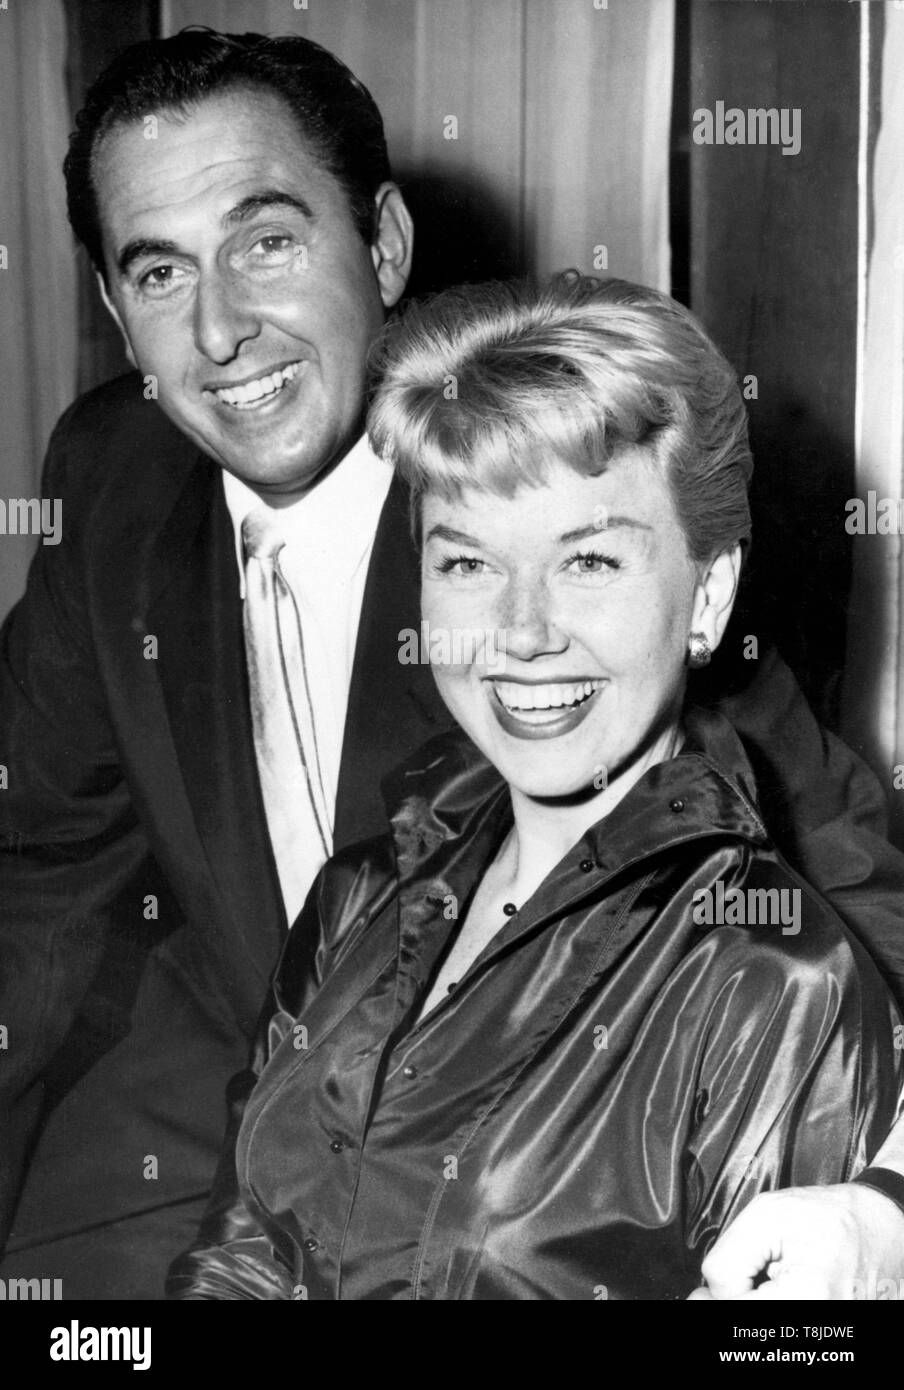 May 13, 2019: File Photo: DORIS DAY, the perennial girl-next-door whose career as a singer and actress spanned almost 50 years and made her one of the biggest Hollywood stars and most popular entertainers in the United States has died. She was 97. PICTURED: Apr. 12, 1955 - London, England, U.K. - America's sweetheart DORIS DAY with her second husband MARTY MELCHER at Claridges Hotel. (Credit Image: © Keystone Press Agency via ZUMAPRESS.com) Stock Photo